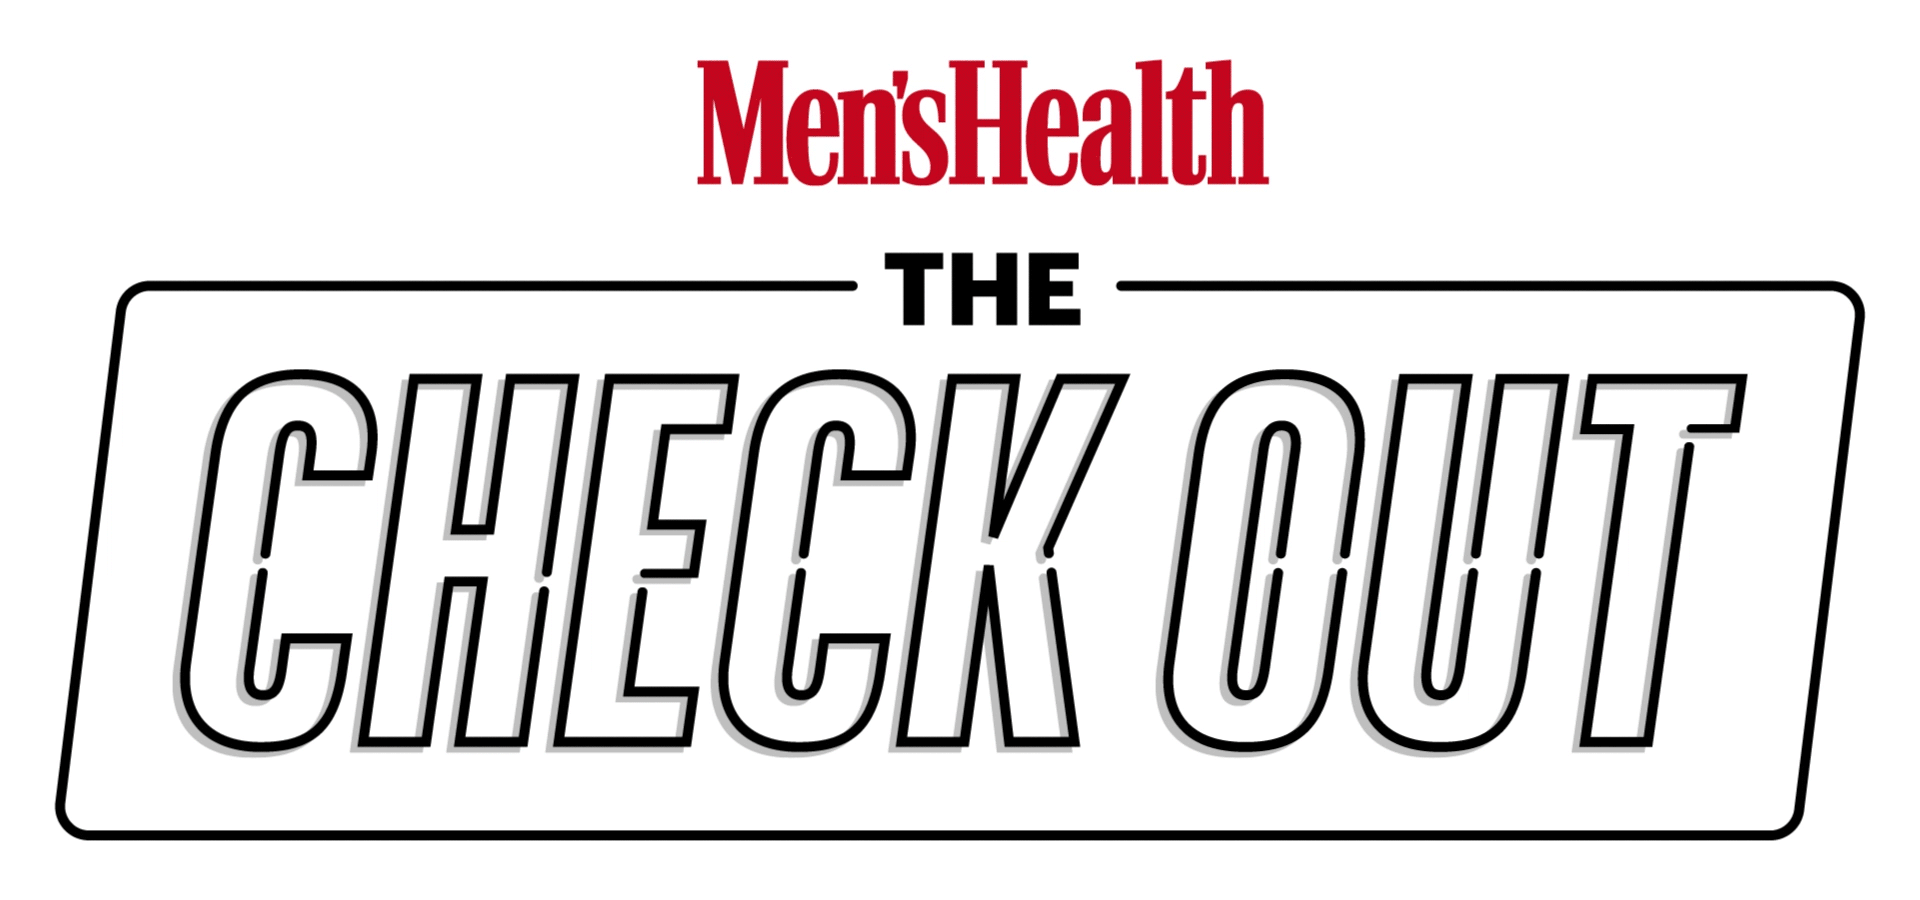 Men's Health The Check Out